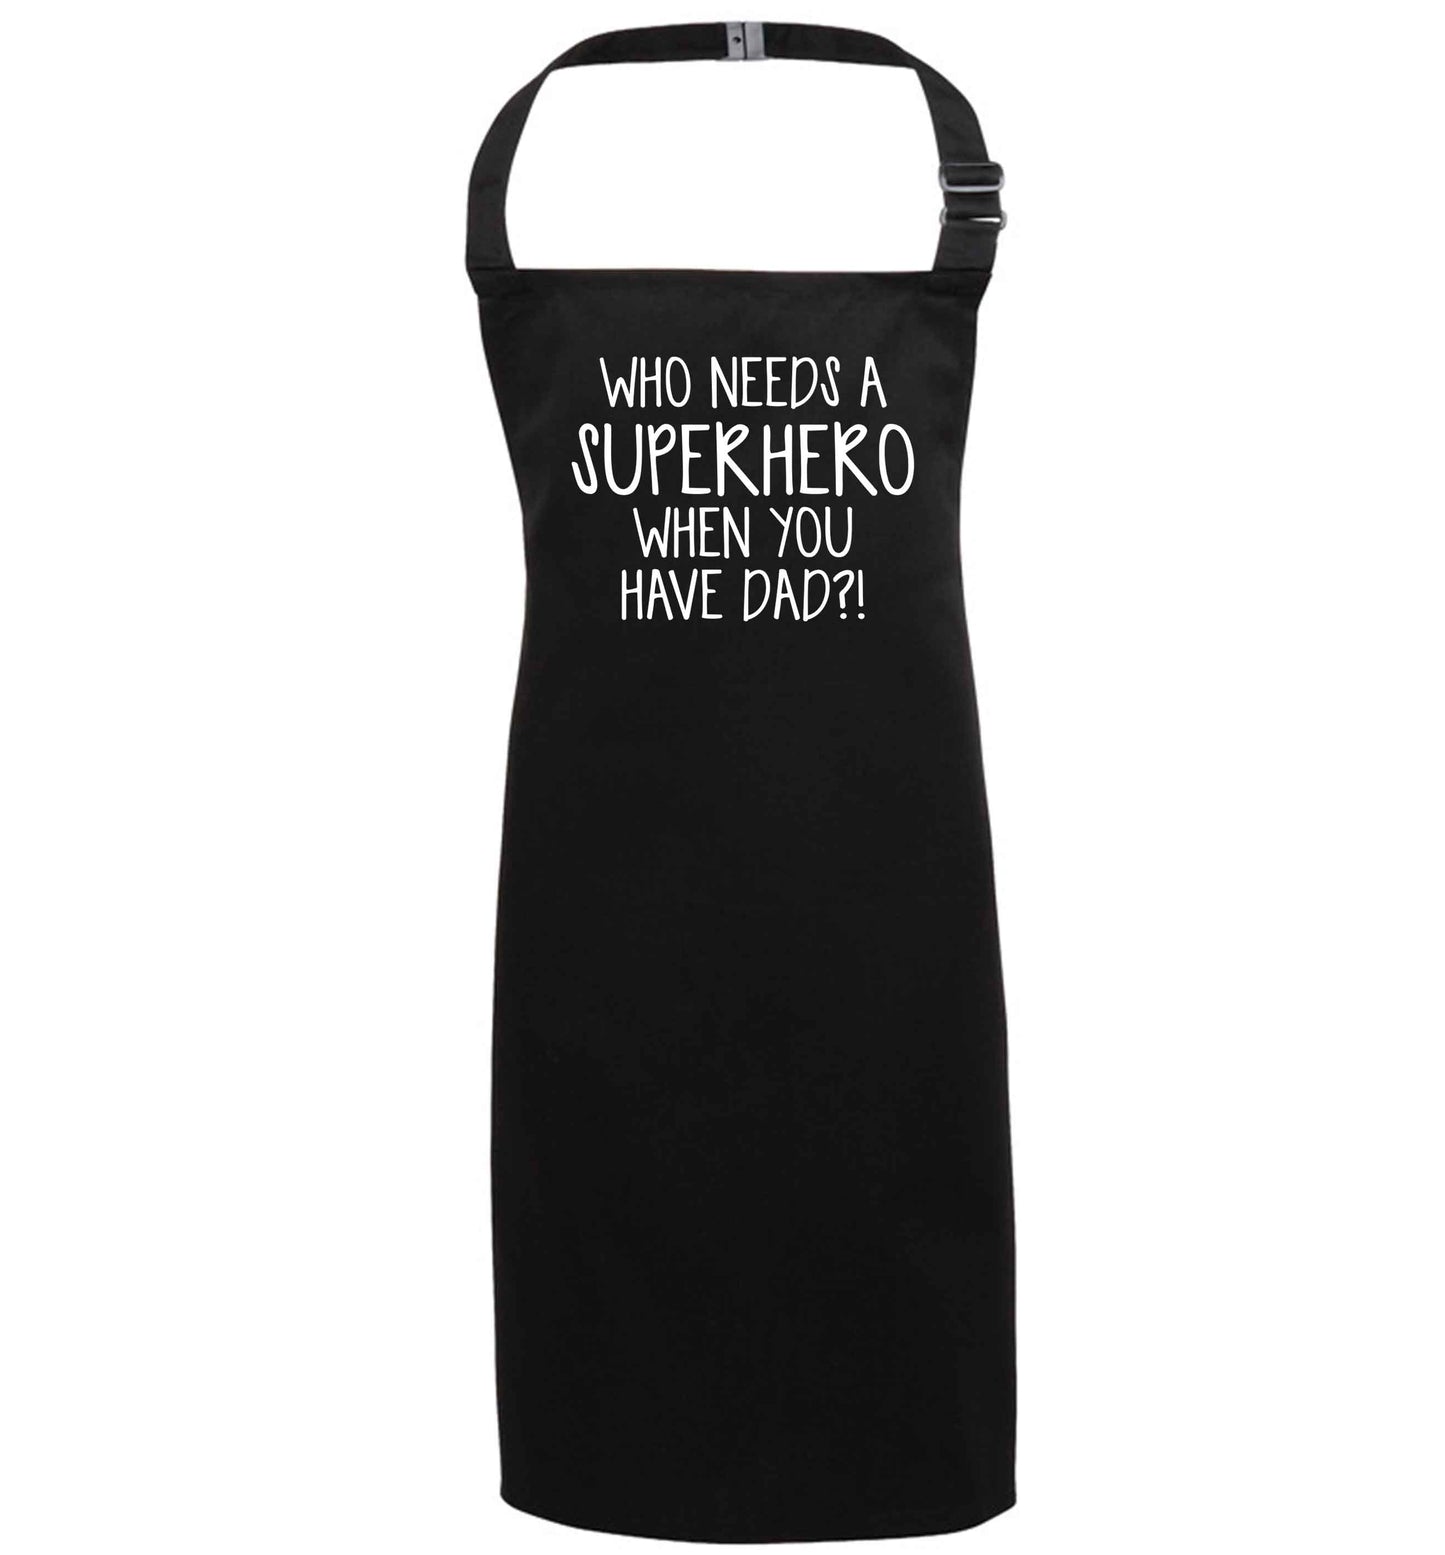 Who needs a superhero when you have dad! black apron 7-10 years